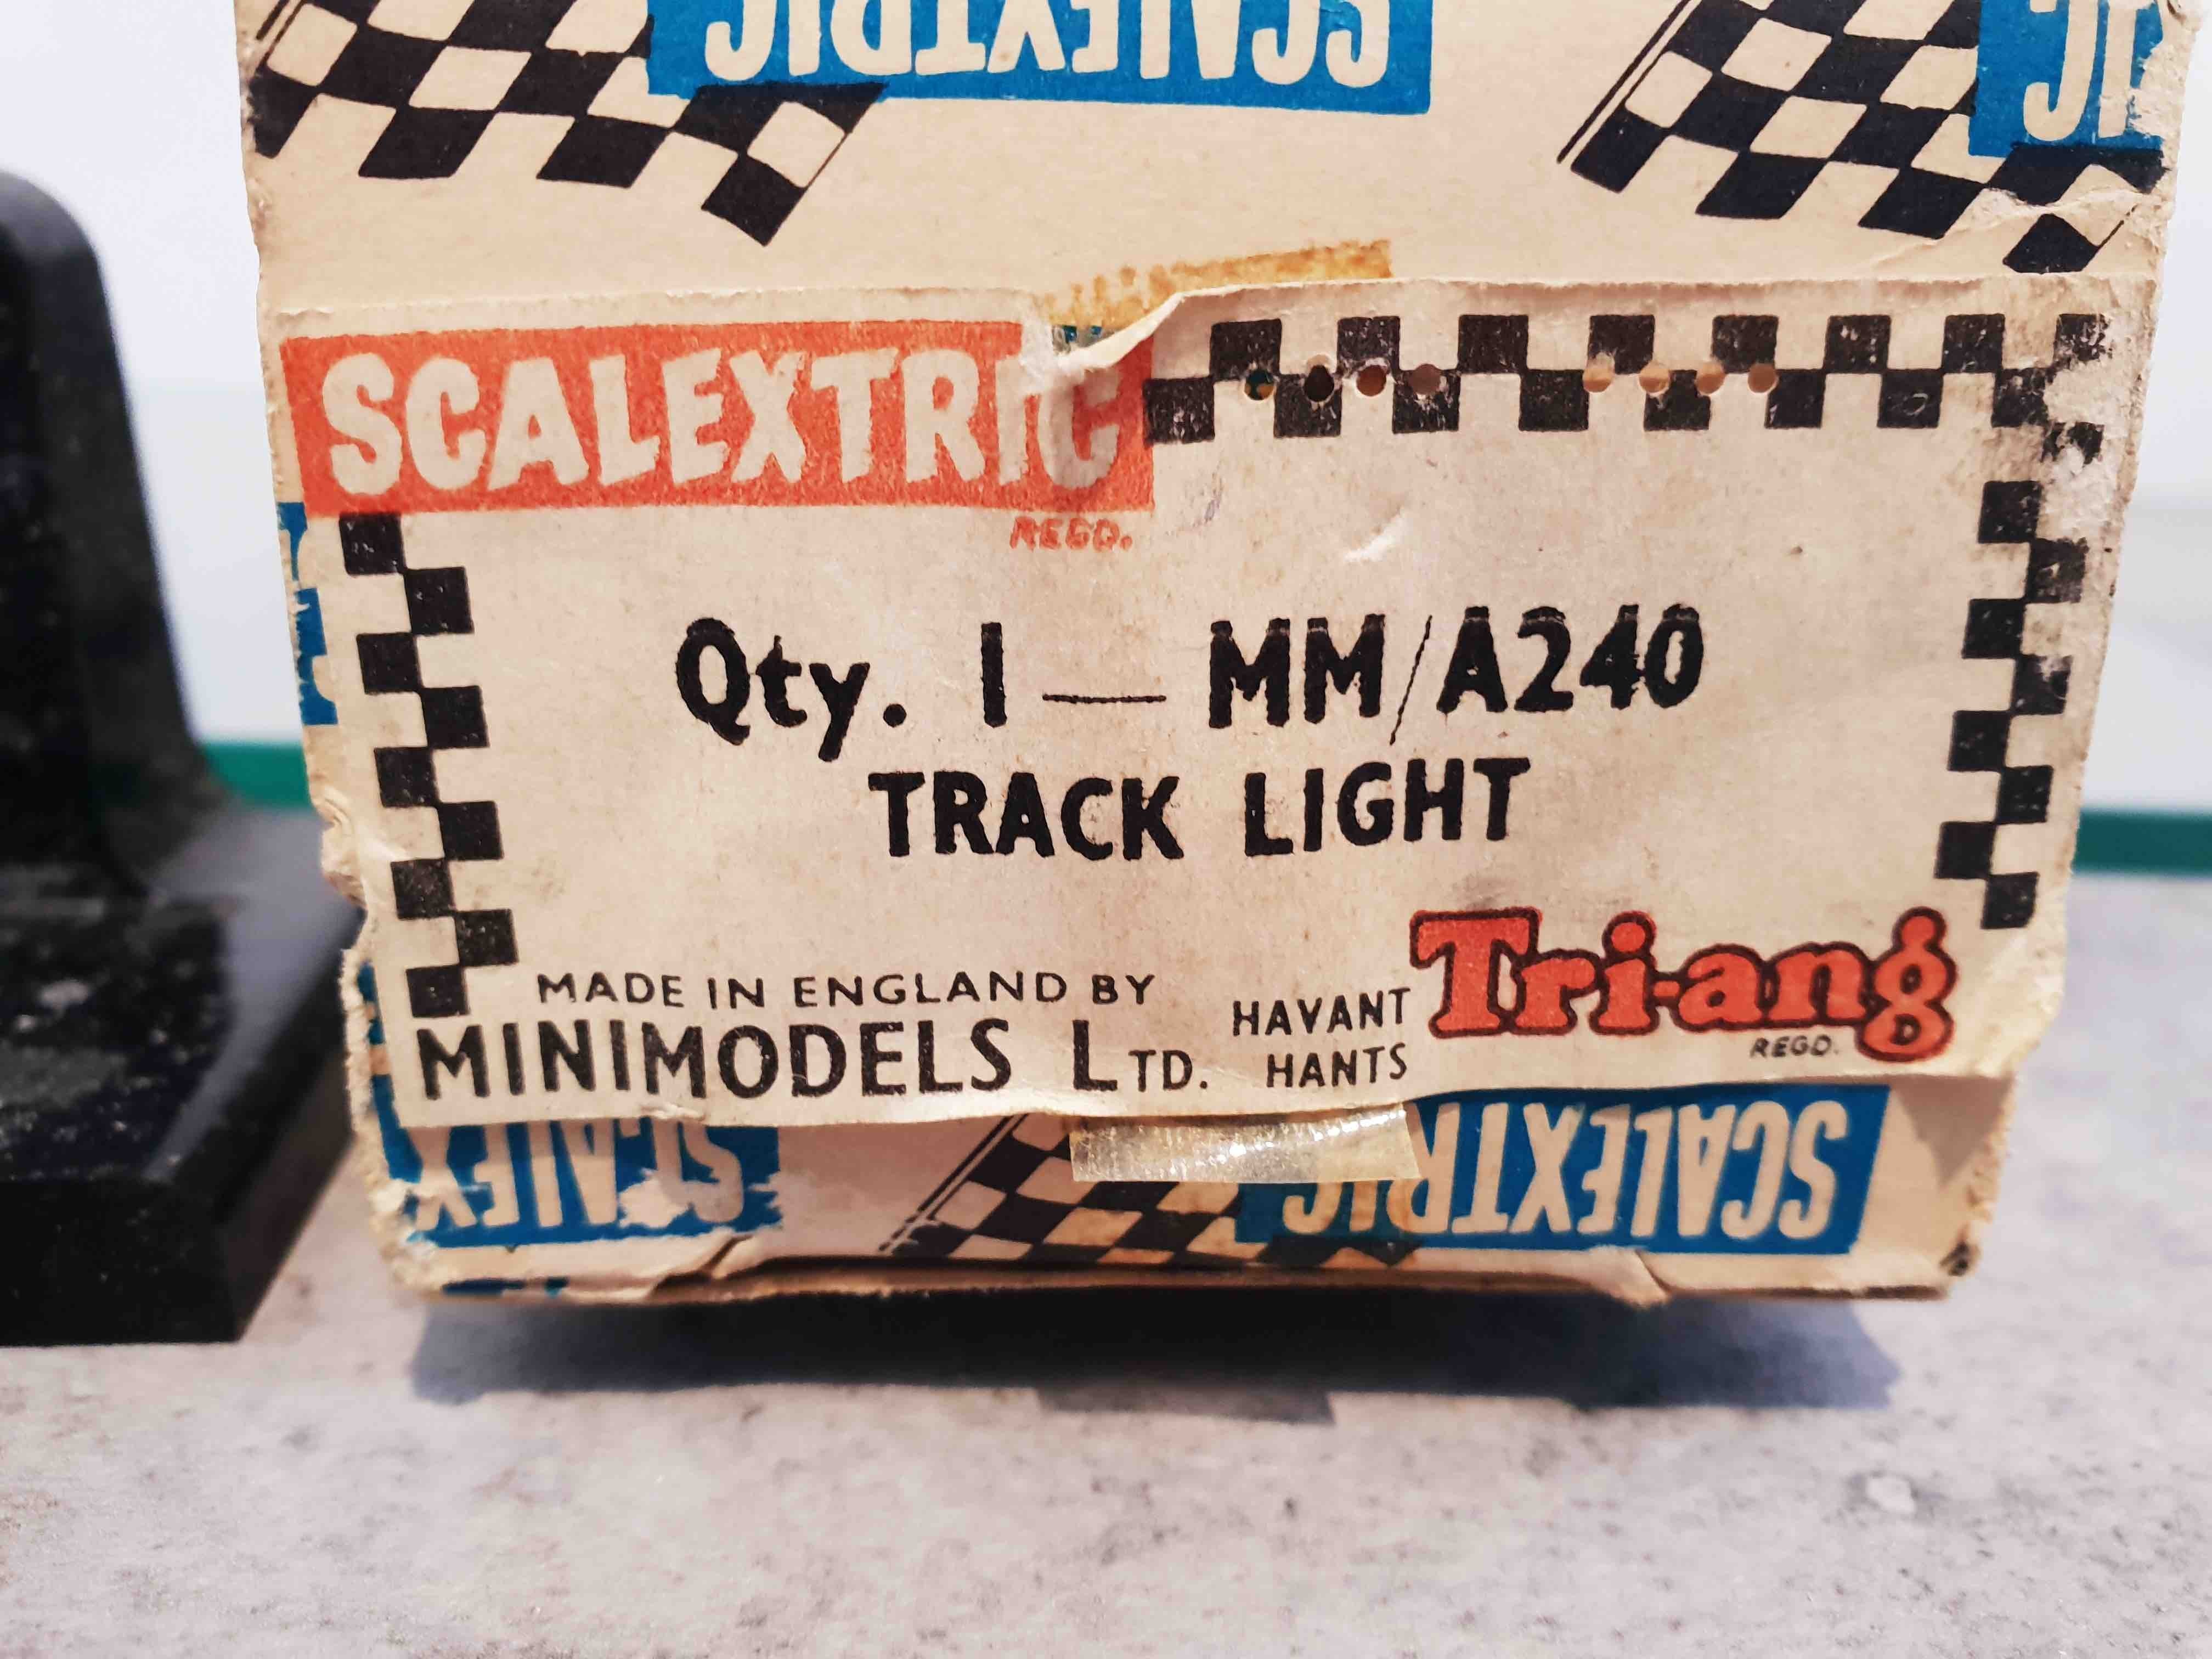 SCALEXTRIC A 240 TRACK LIGHT